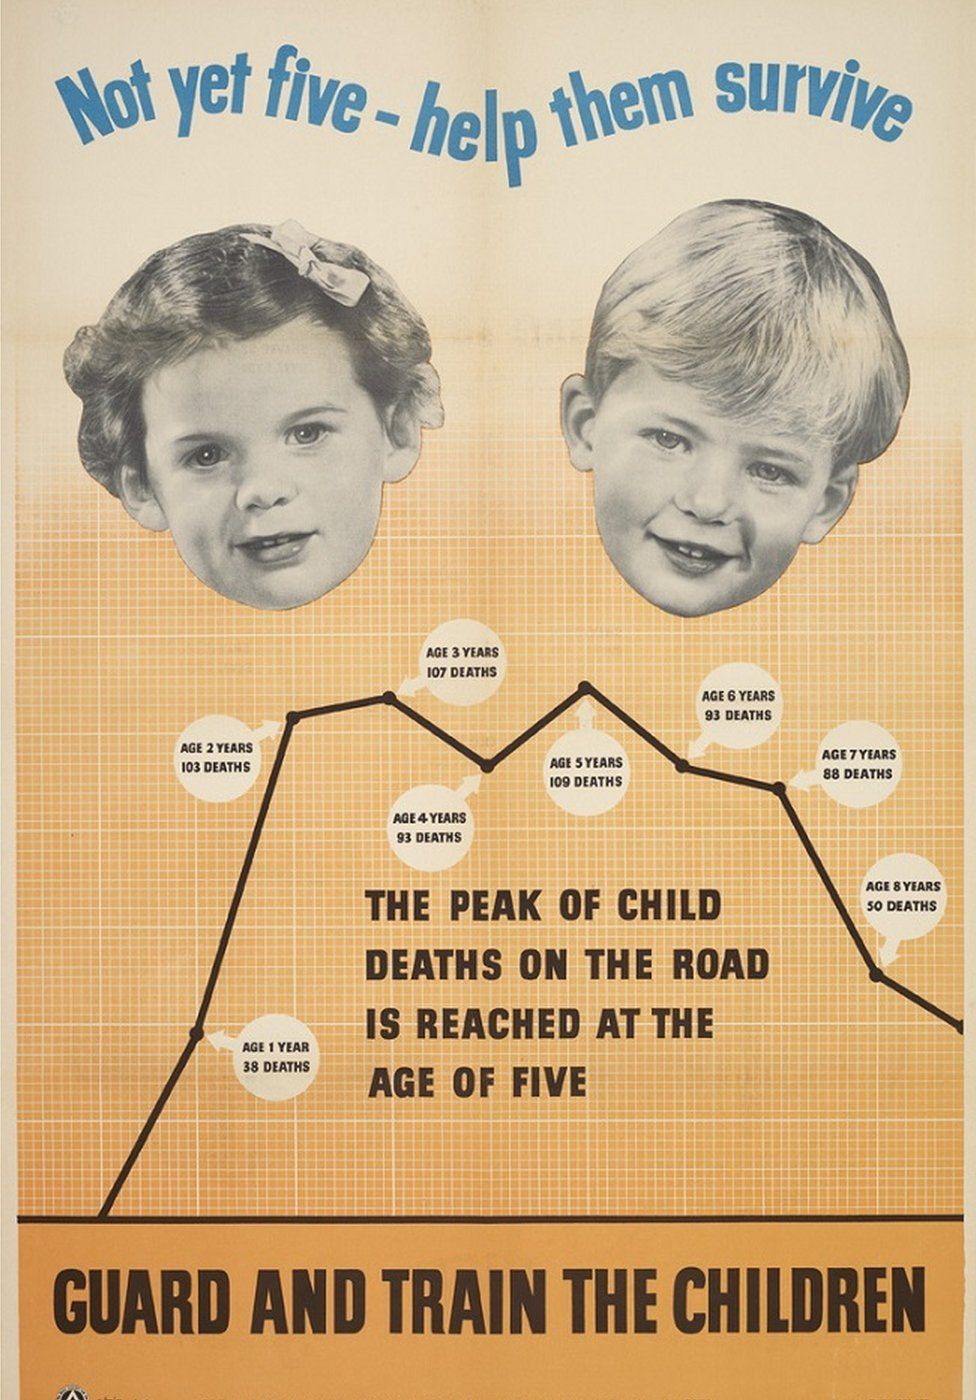 1952 road safety poster